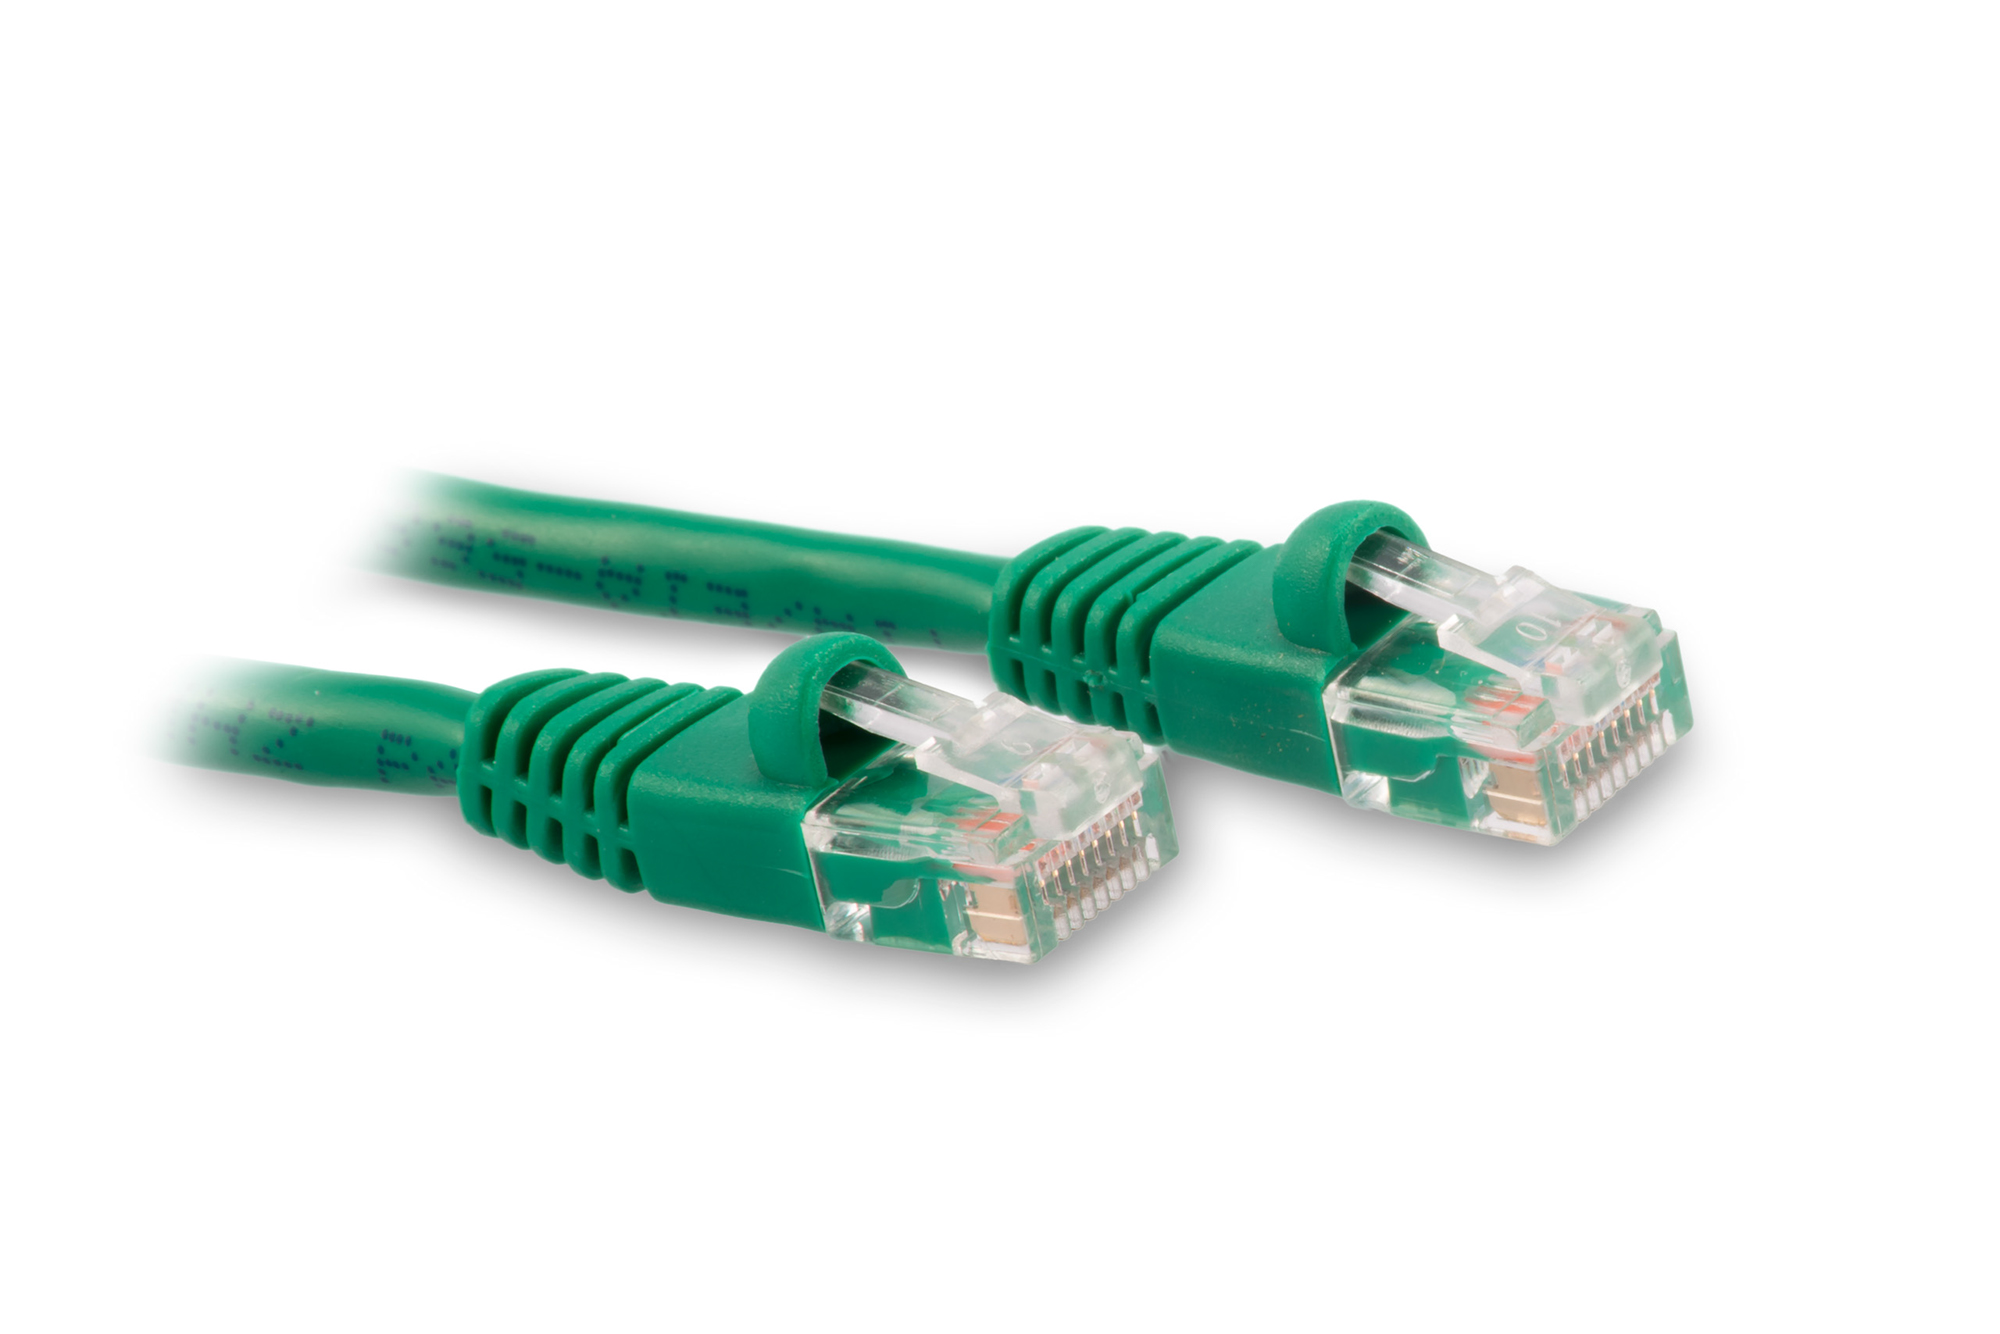 50ft Cat6 Ethernet Patch Cable - Green Color - Snagless Boot, Stranded, RJ45, 550Mhz, 24AWG